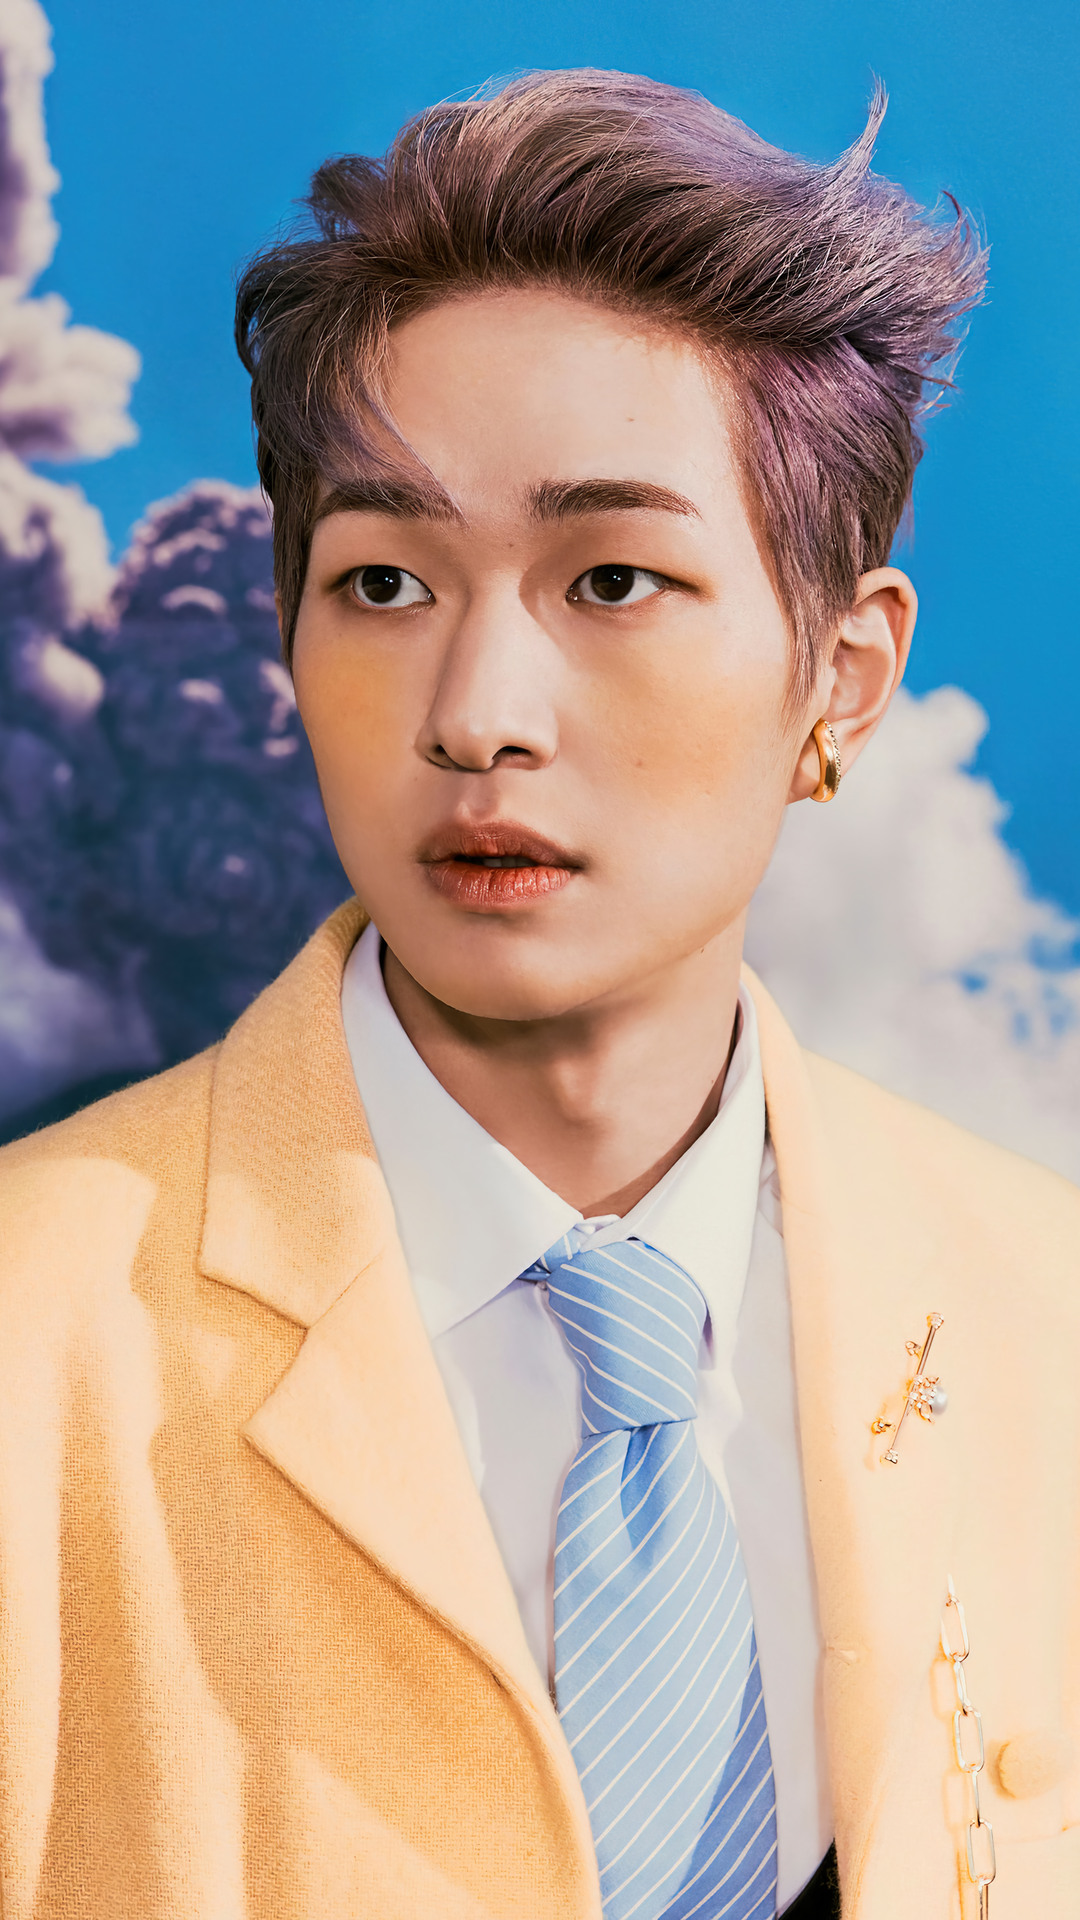 Free download Shinee Onew Dont Call Me Wallpaper 4K 53169 [1080x1920